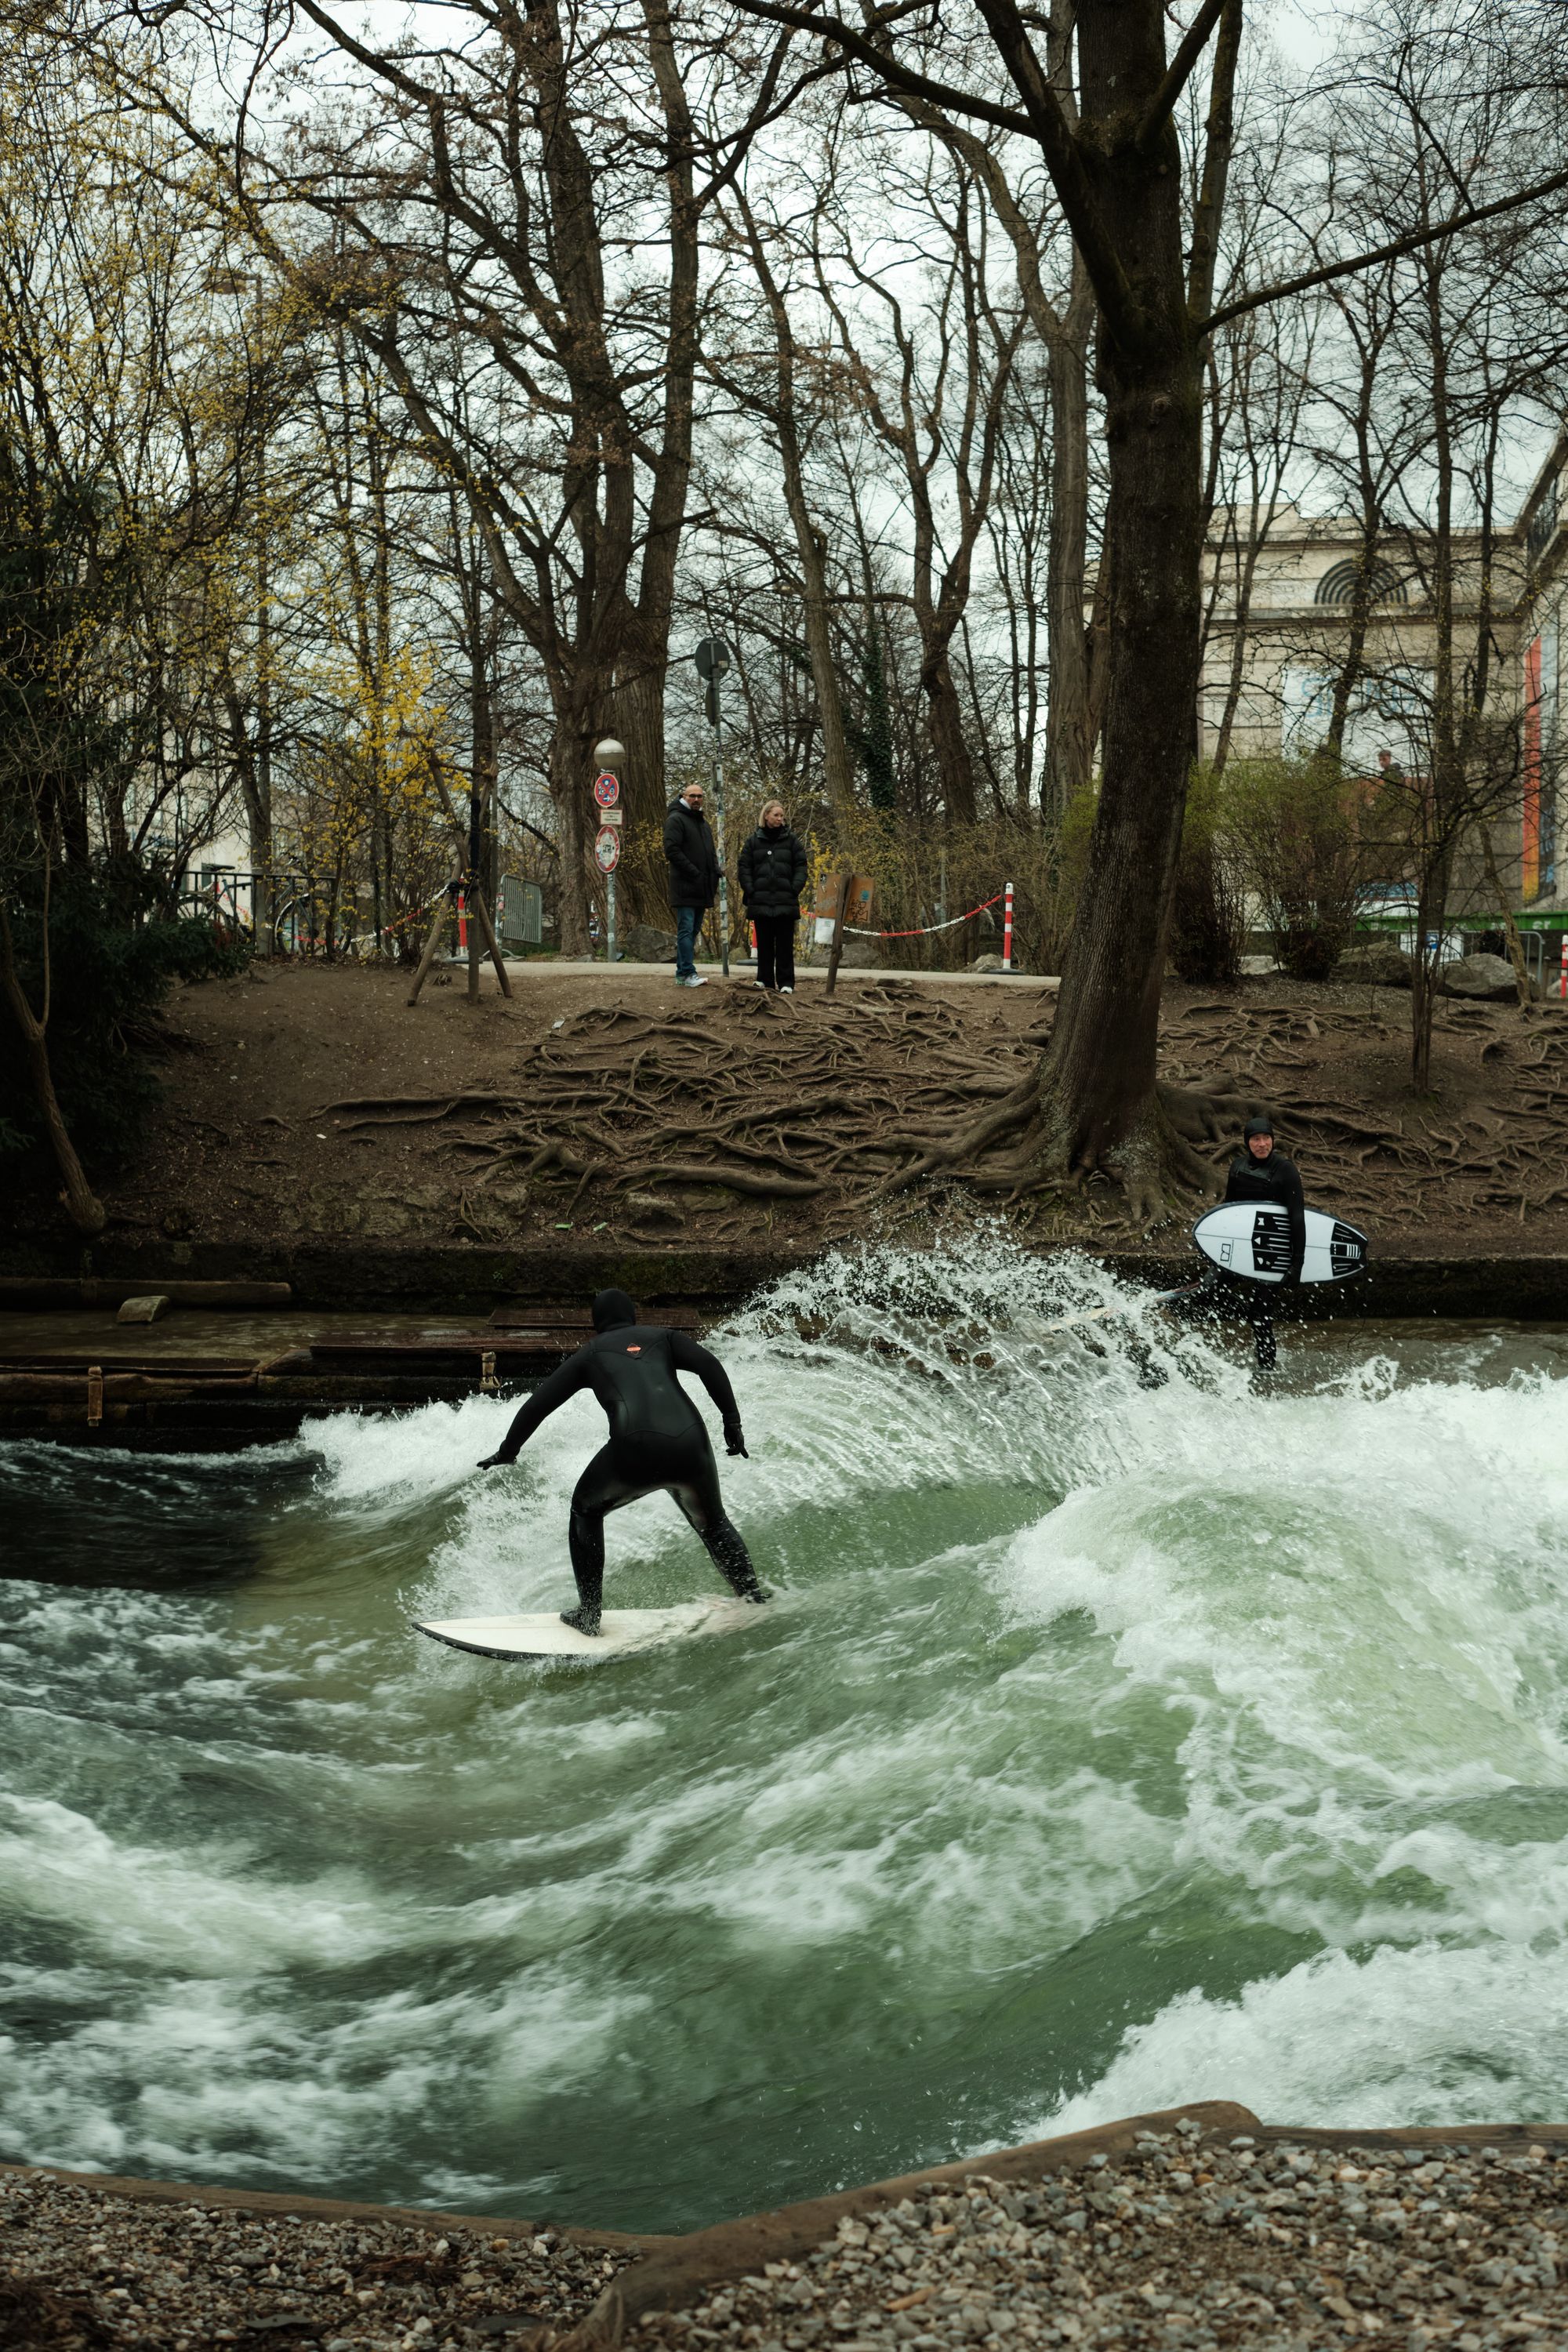 Surfing In The River